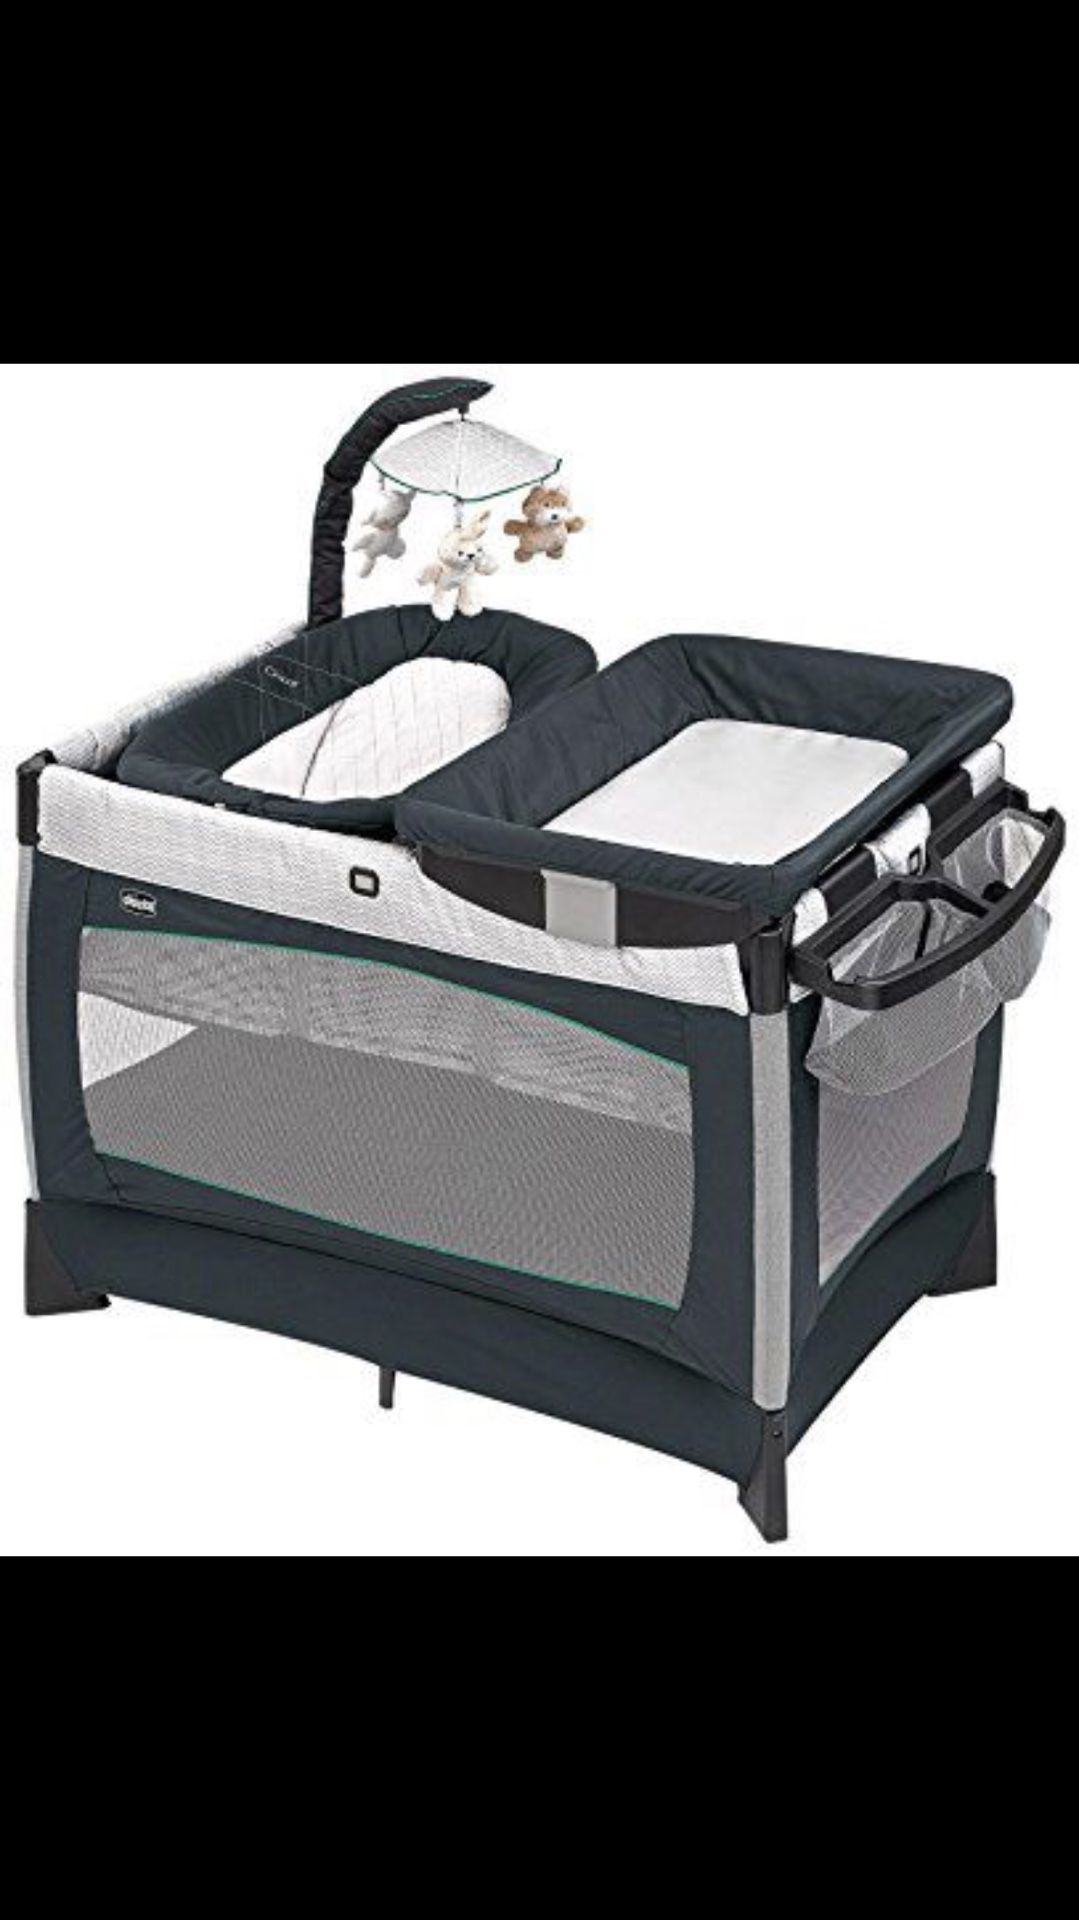 Chicco play yard, bed,diaper changing area,good condition! New one is $239.00 plus tax.